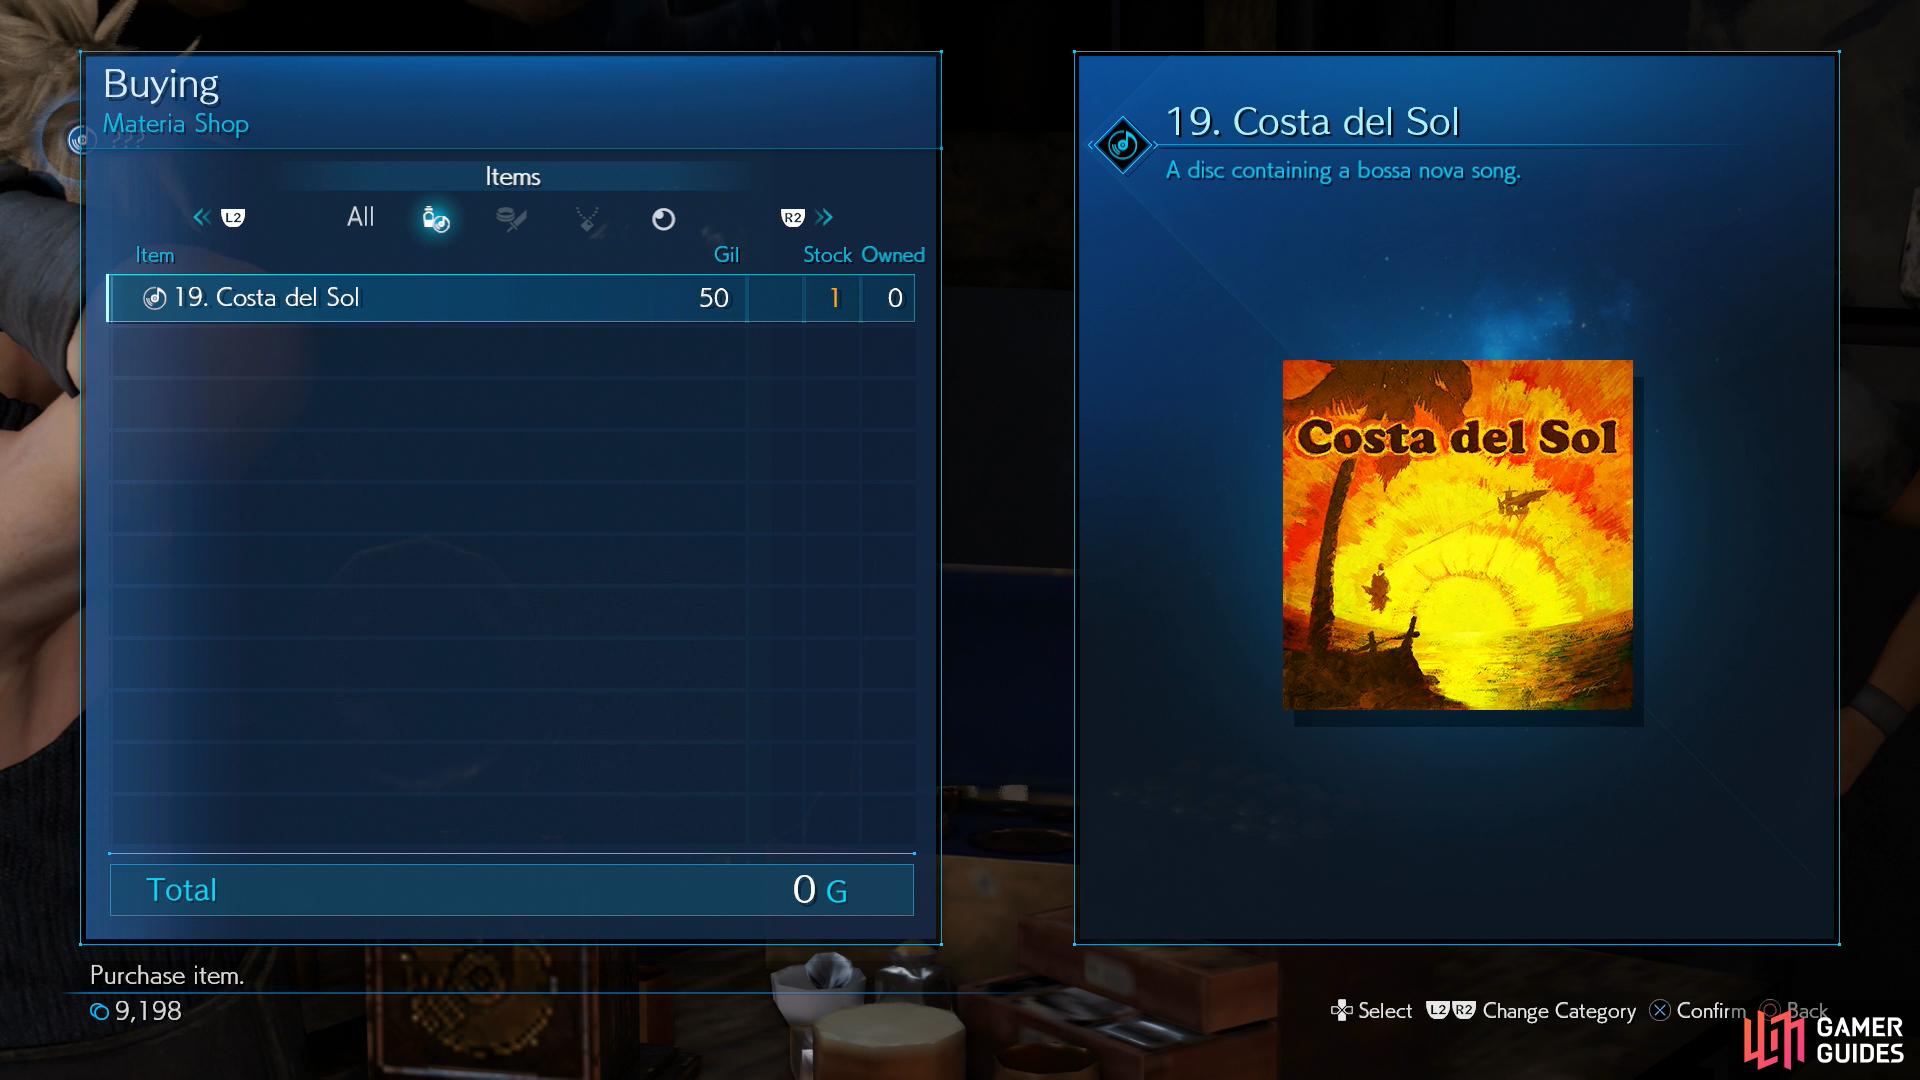 and buy the Costa del Sol Music Disc from a merchant.